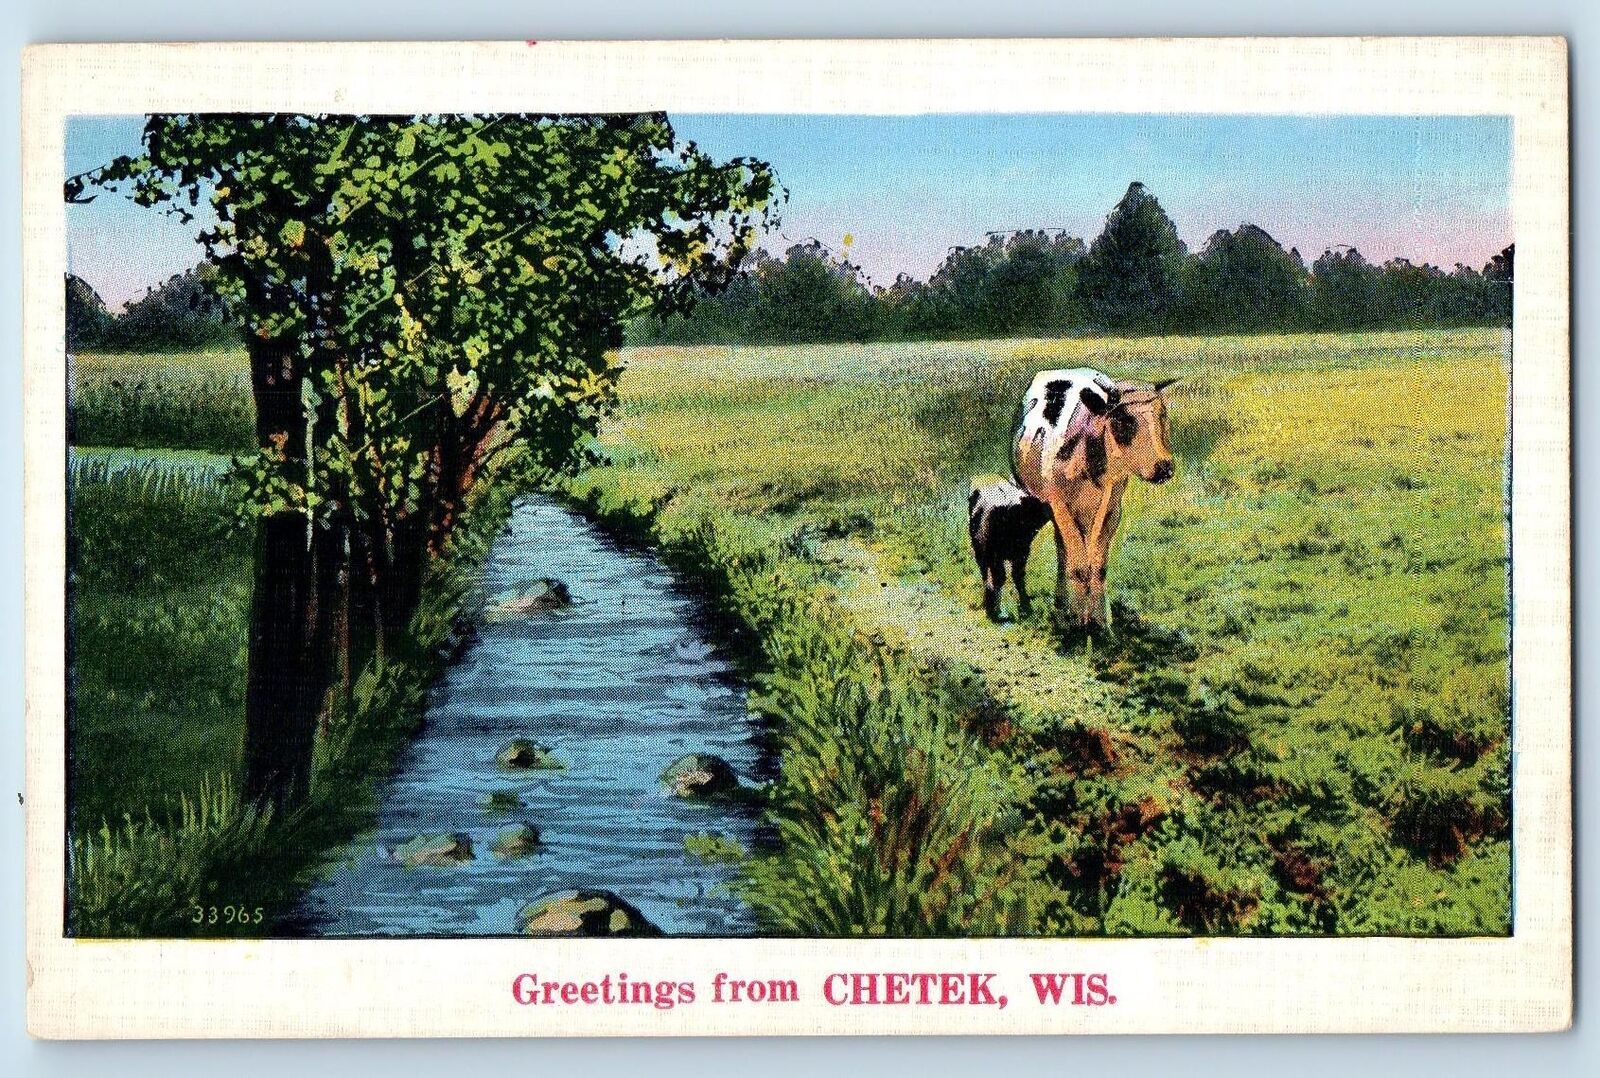 Chetek Wisconsin WI Postcard Greetings River And Cows Scenic View c1920s Antique